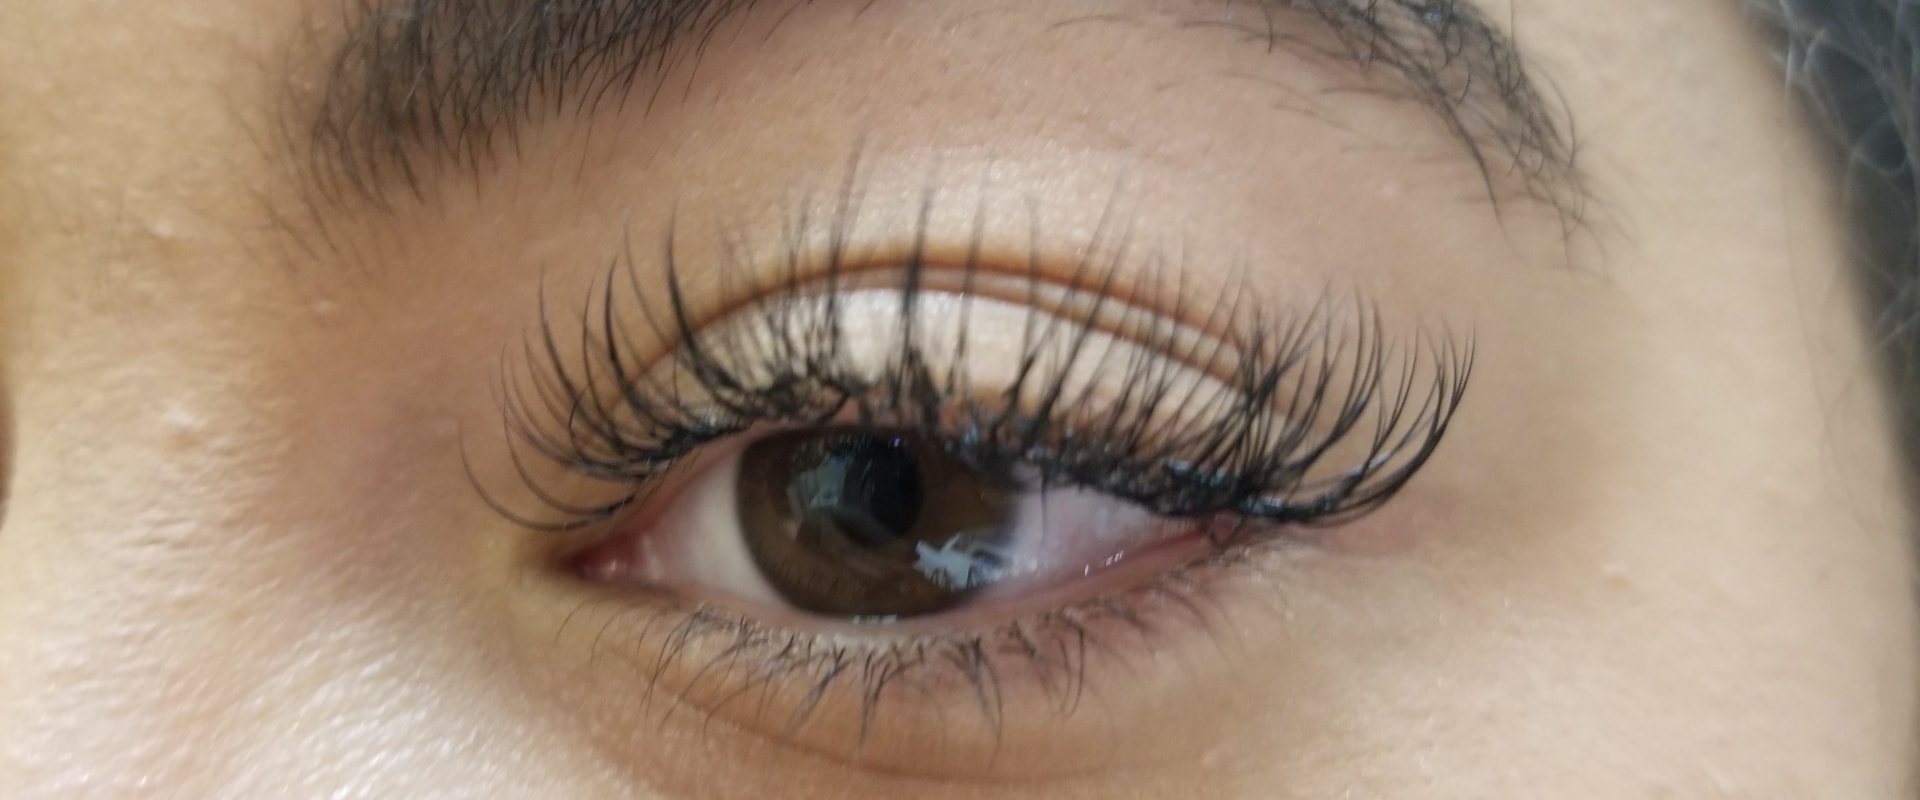 Can lash extension look natural?